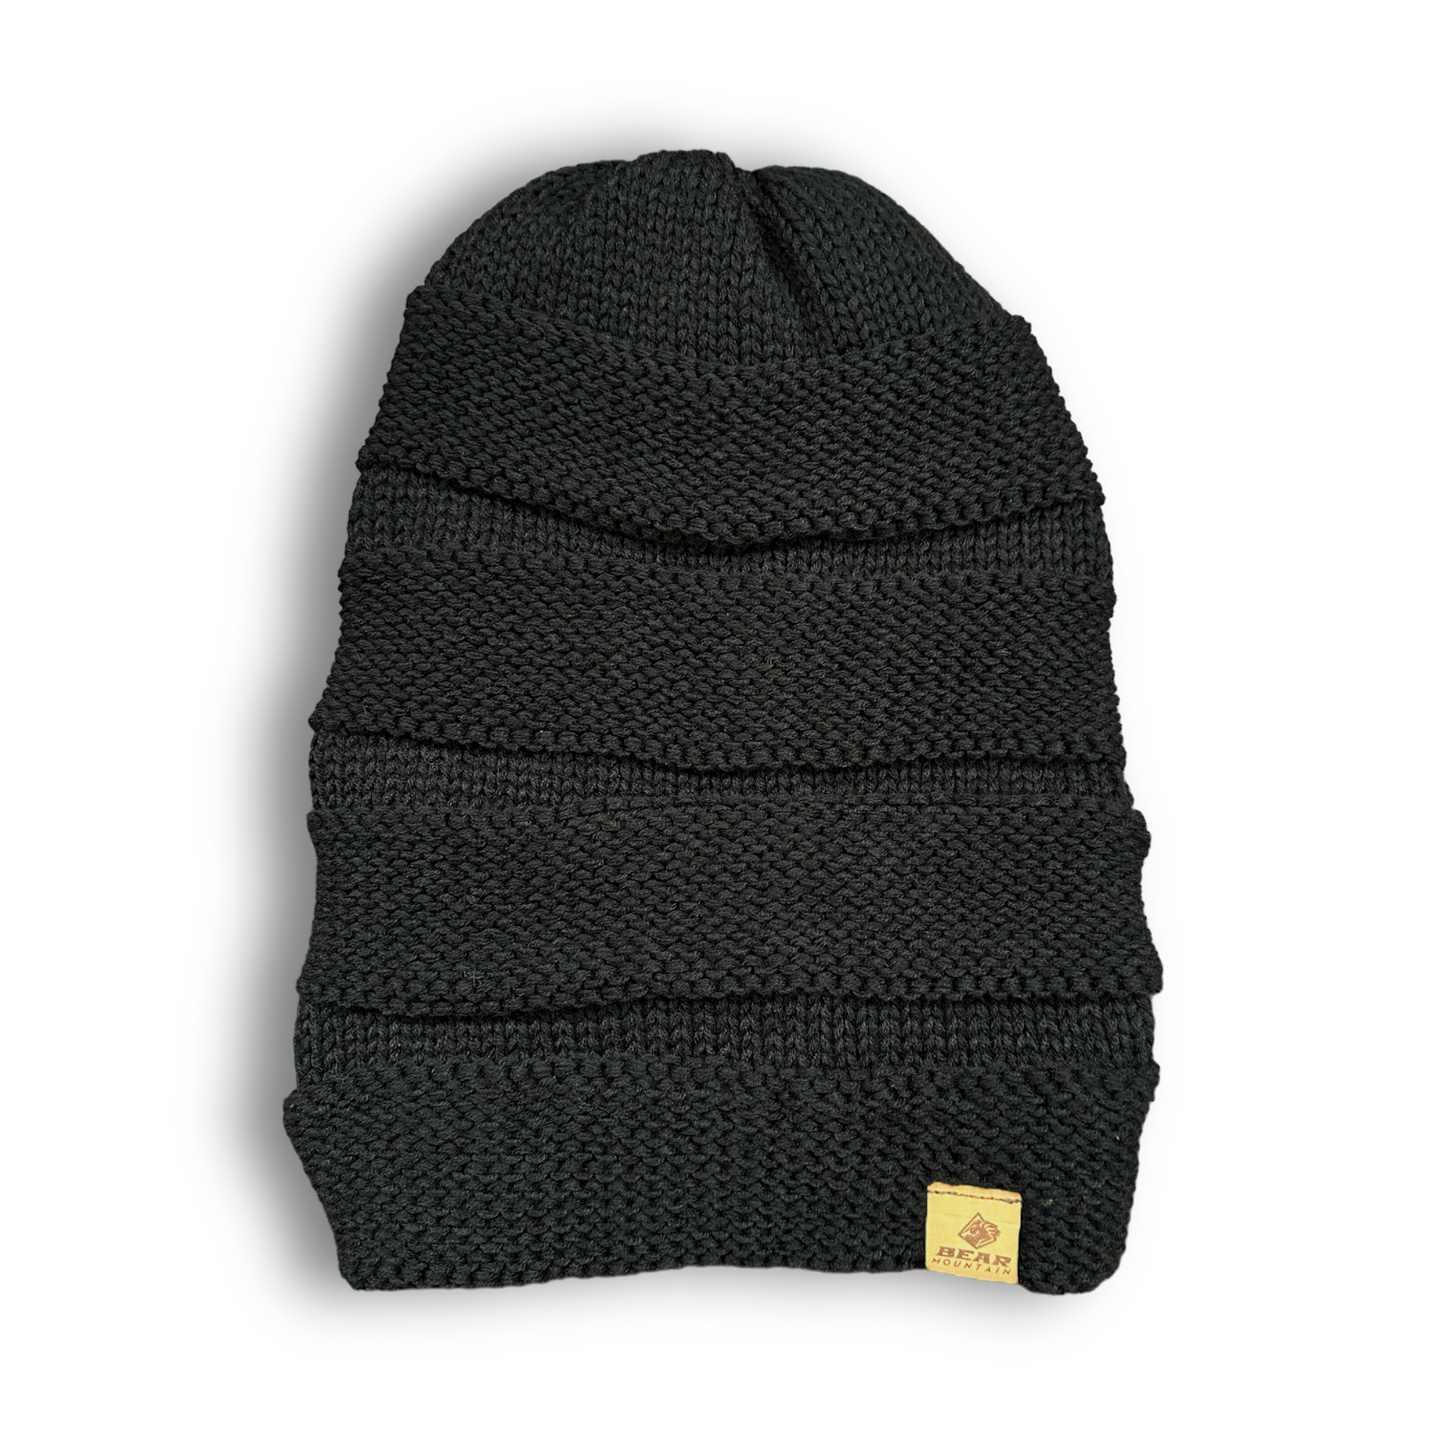 Bear mountain slouch beanie in black color with logo on bottom left corner